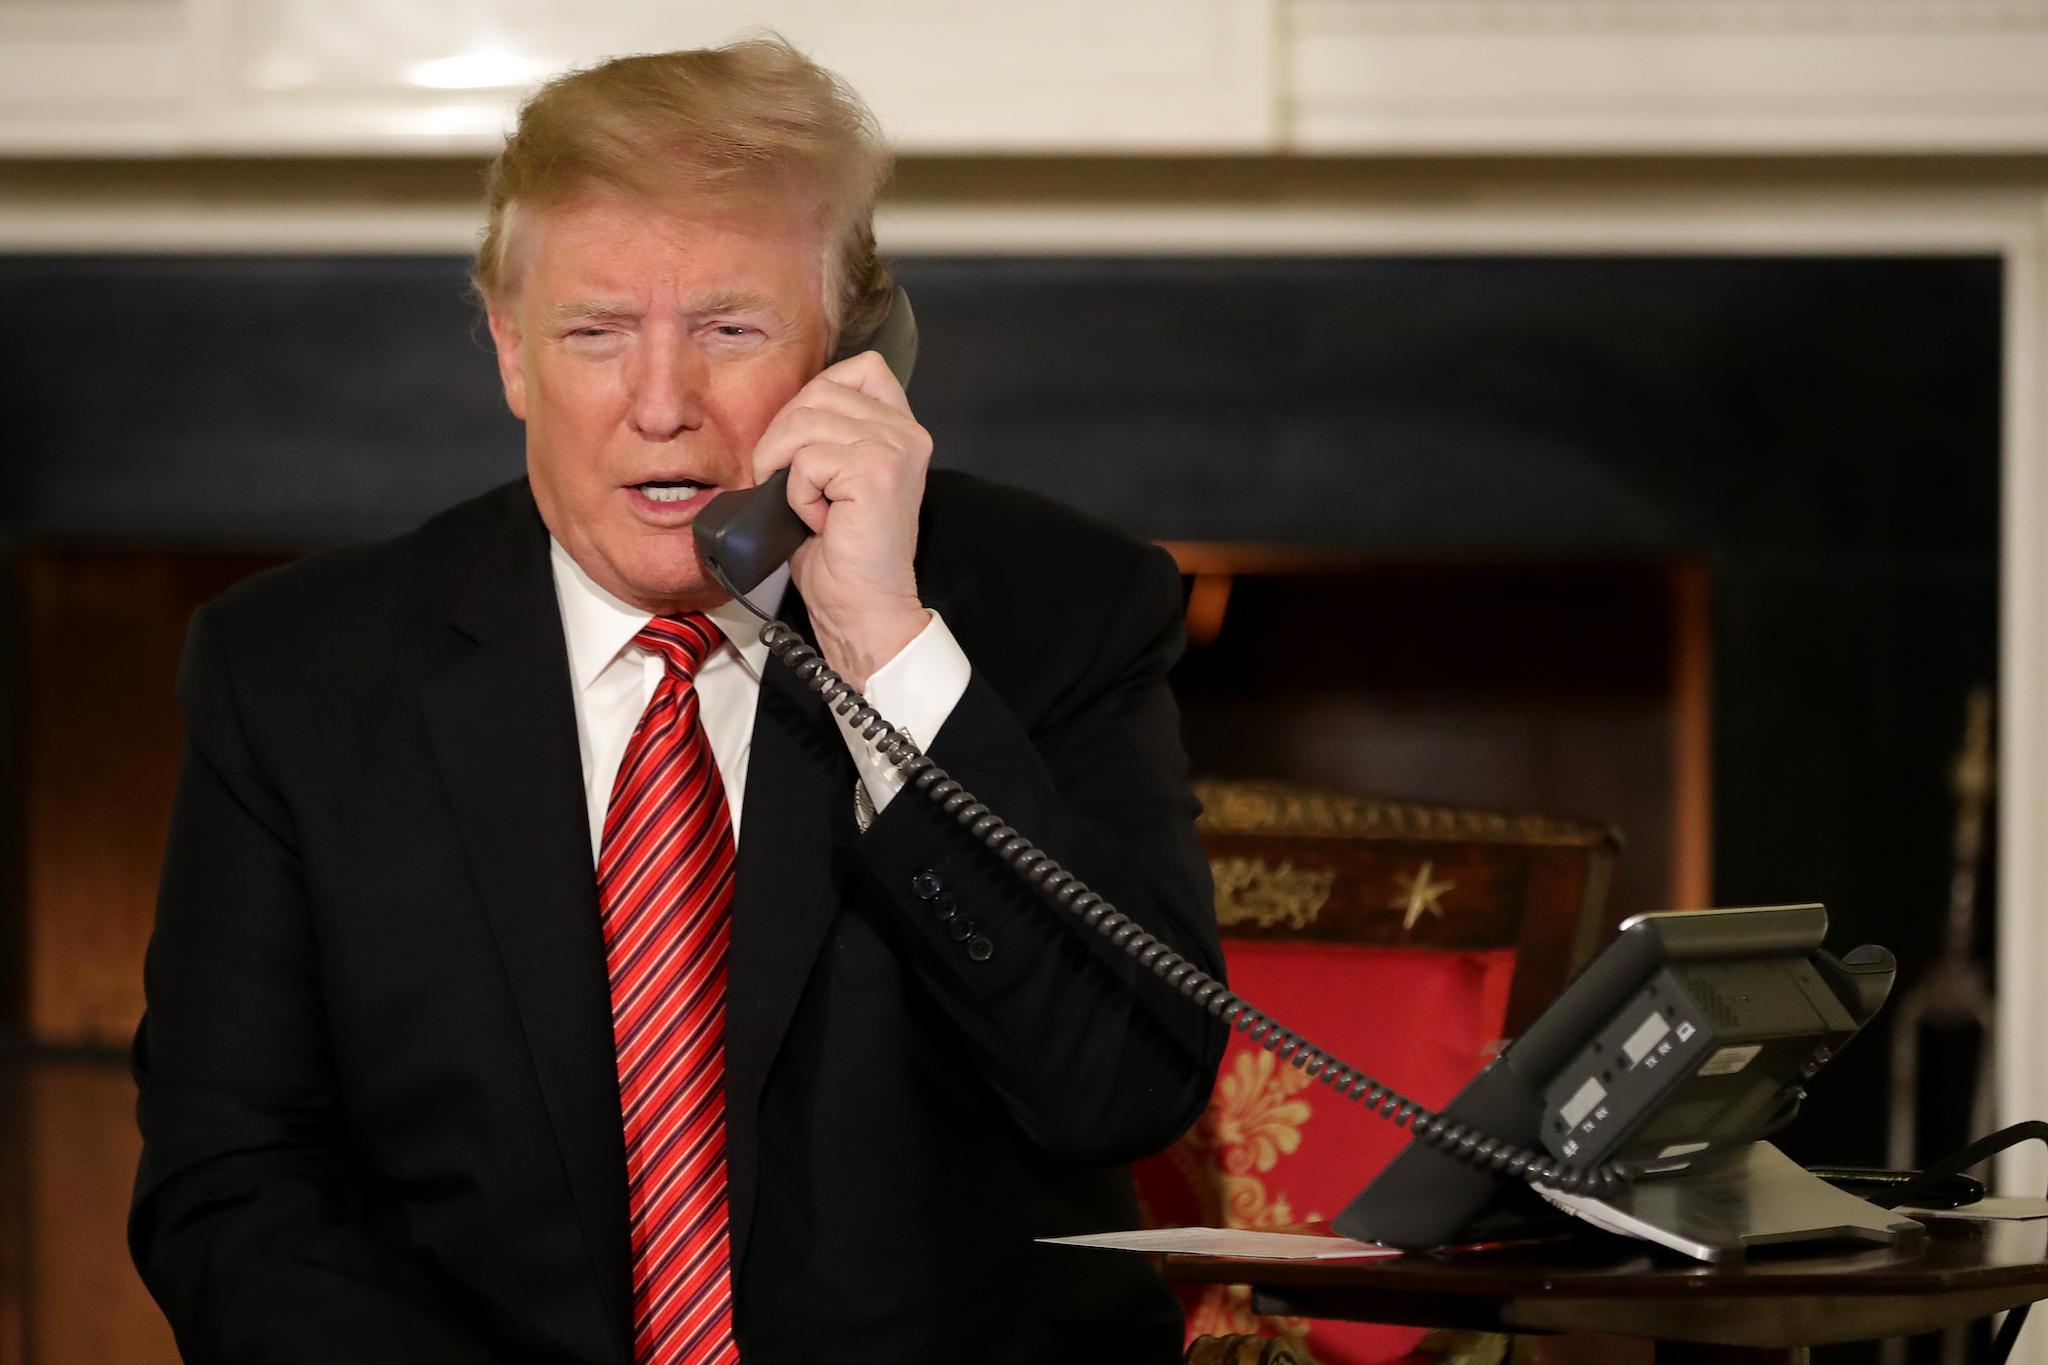 U.S. President Donald Trump takes phone calls from children as he participates in tracking Santa Claus' movements with the North American Aerospace Defense Command (NORAD) Santa Tracker on Christmas Eve in the East Room of the White House December 24, 2018